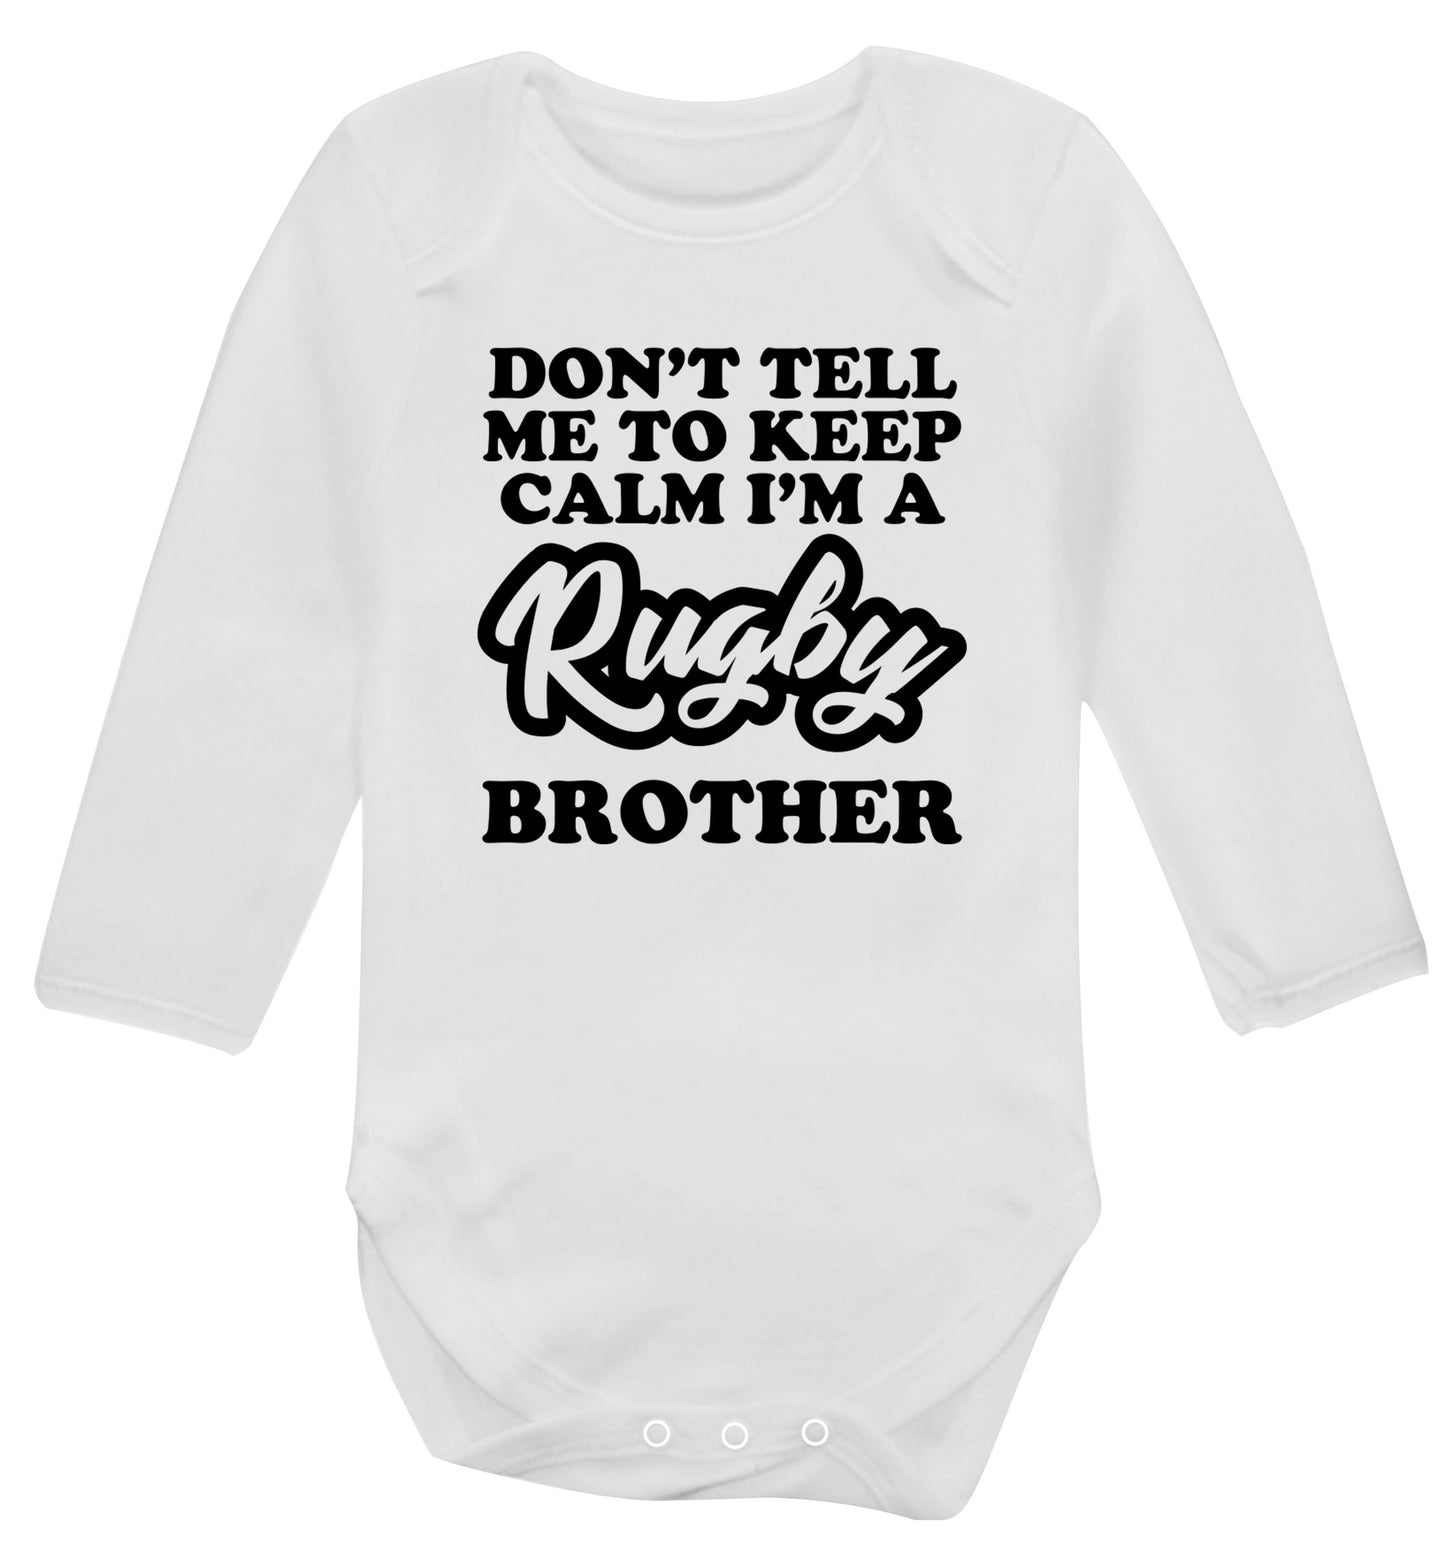 Don't tell me keep calm I'm a rugby brother Baby Vest long sleeved white 6-12 months